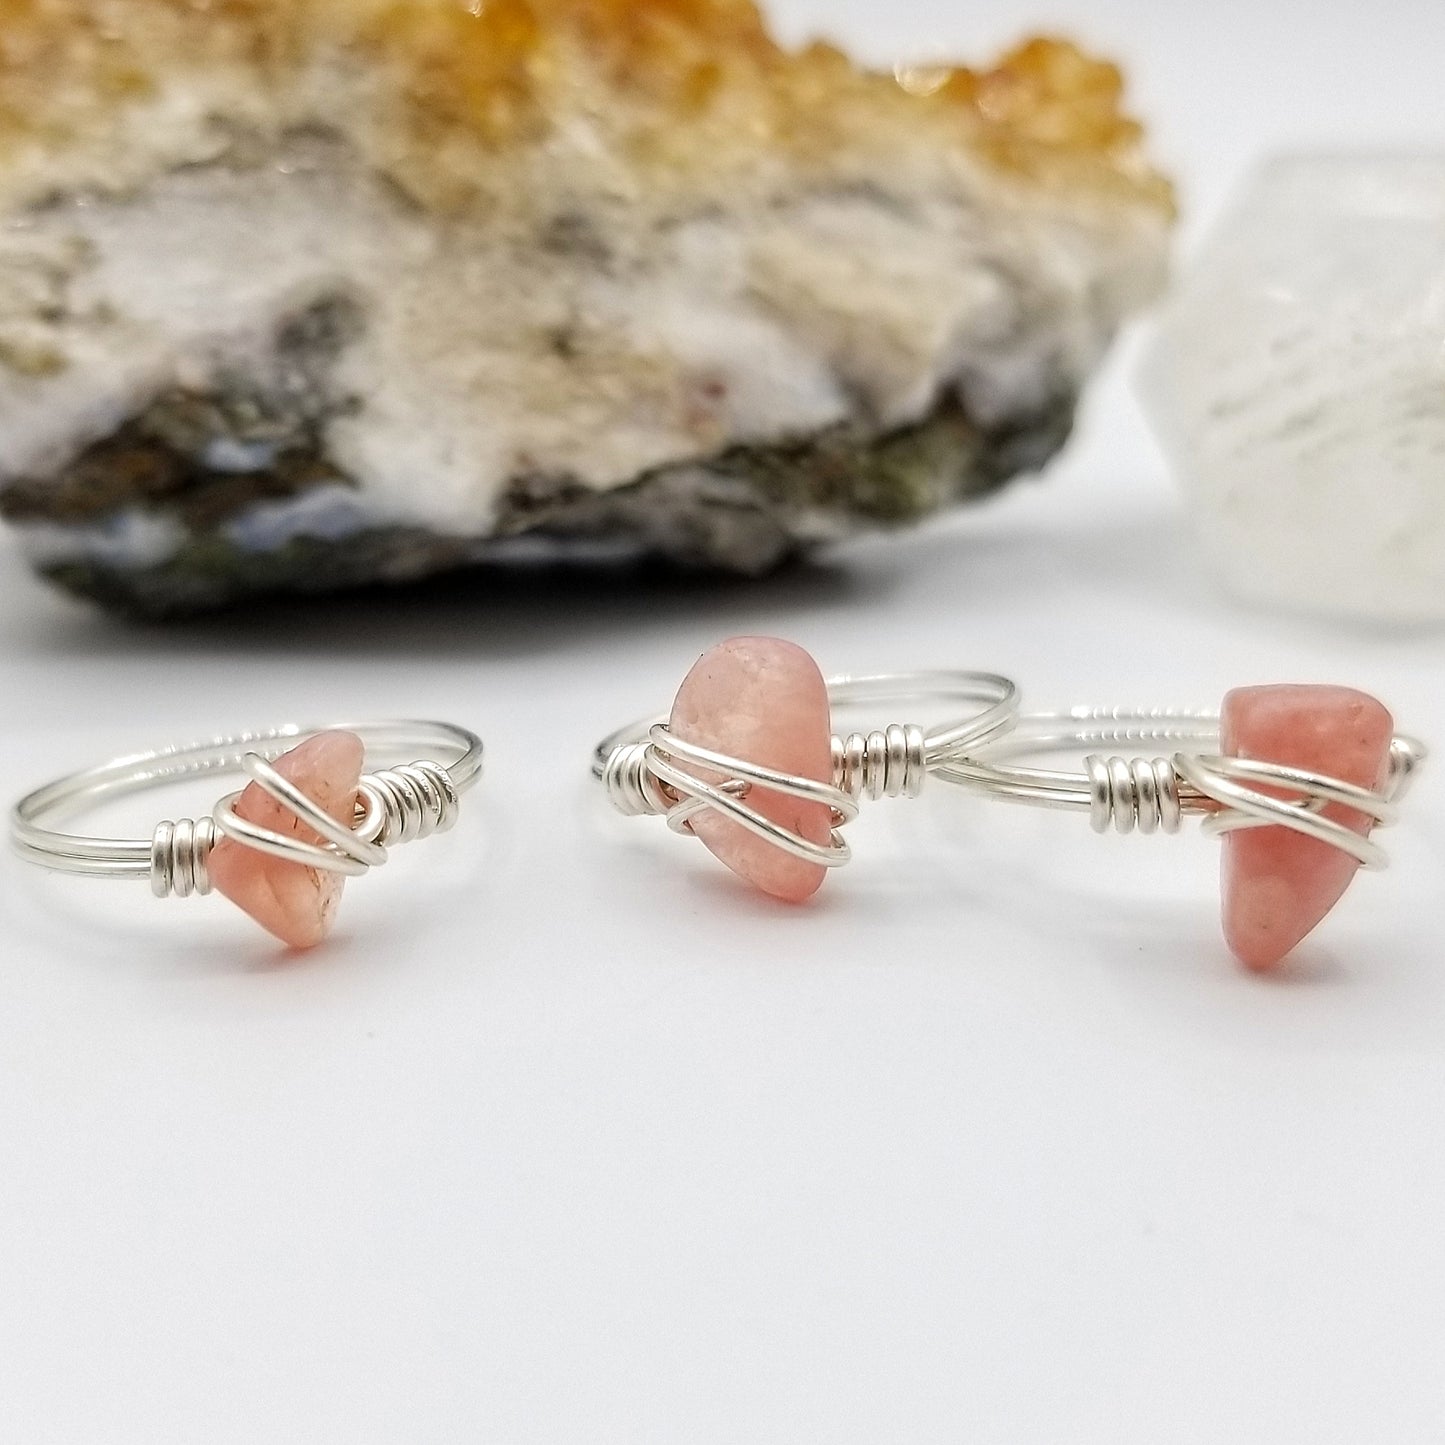 Rhodochrosite Ring, Wire Wrapped Silver Ring